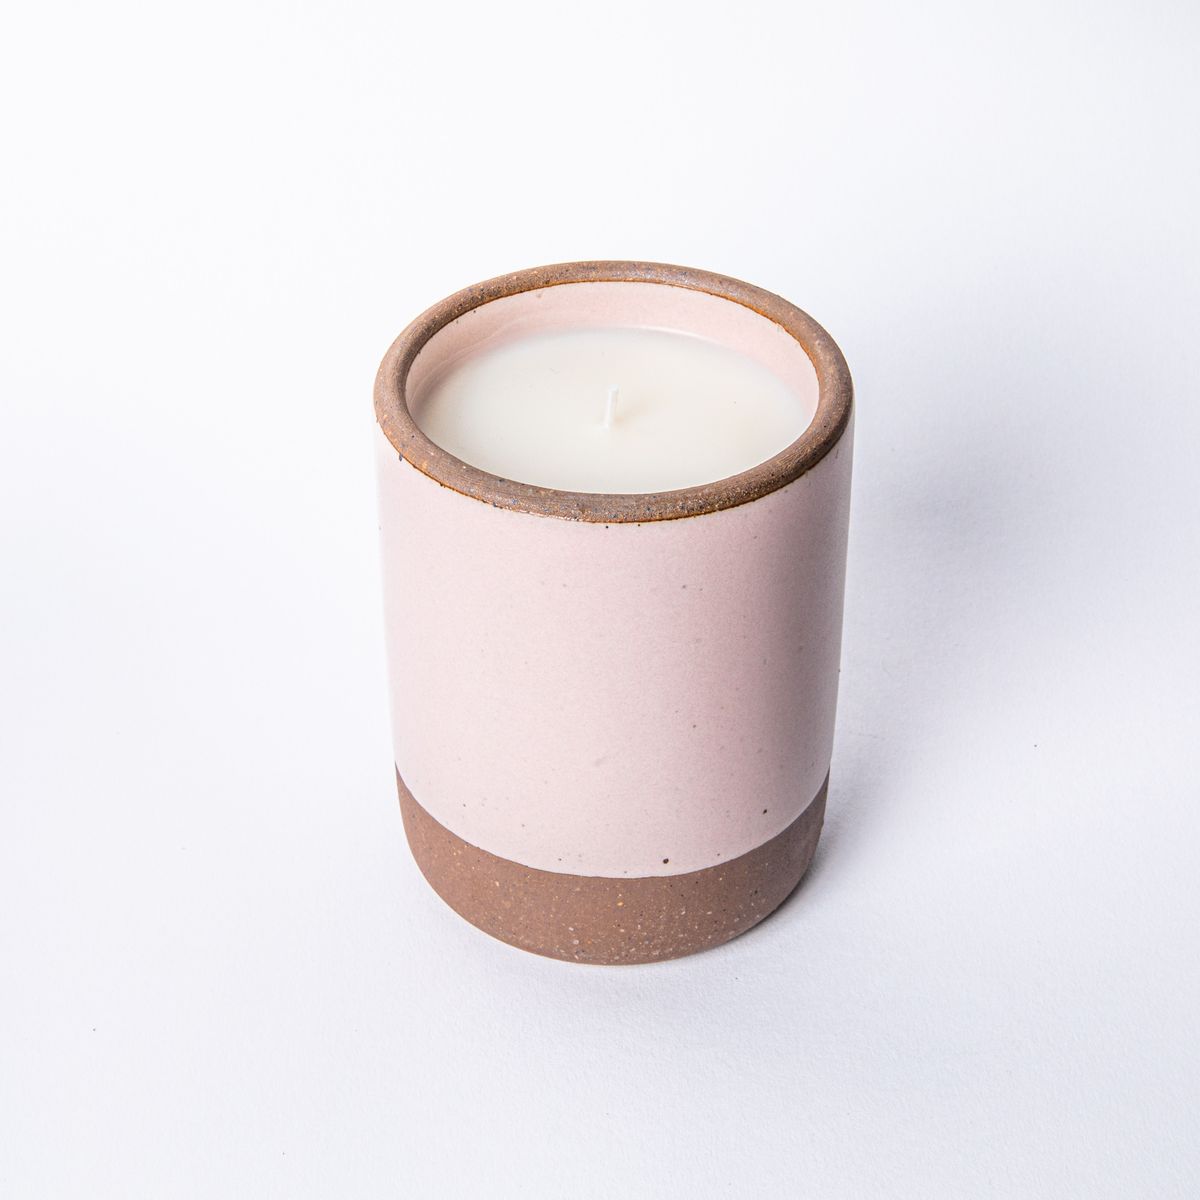 Large ceramic vessel in soft light pink color with candle inside